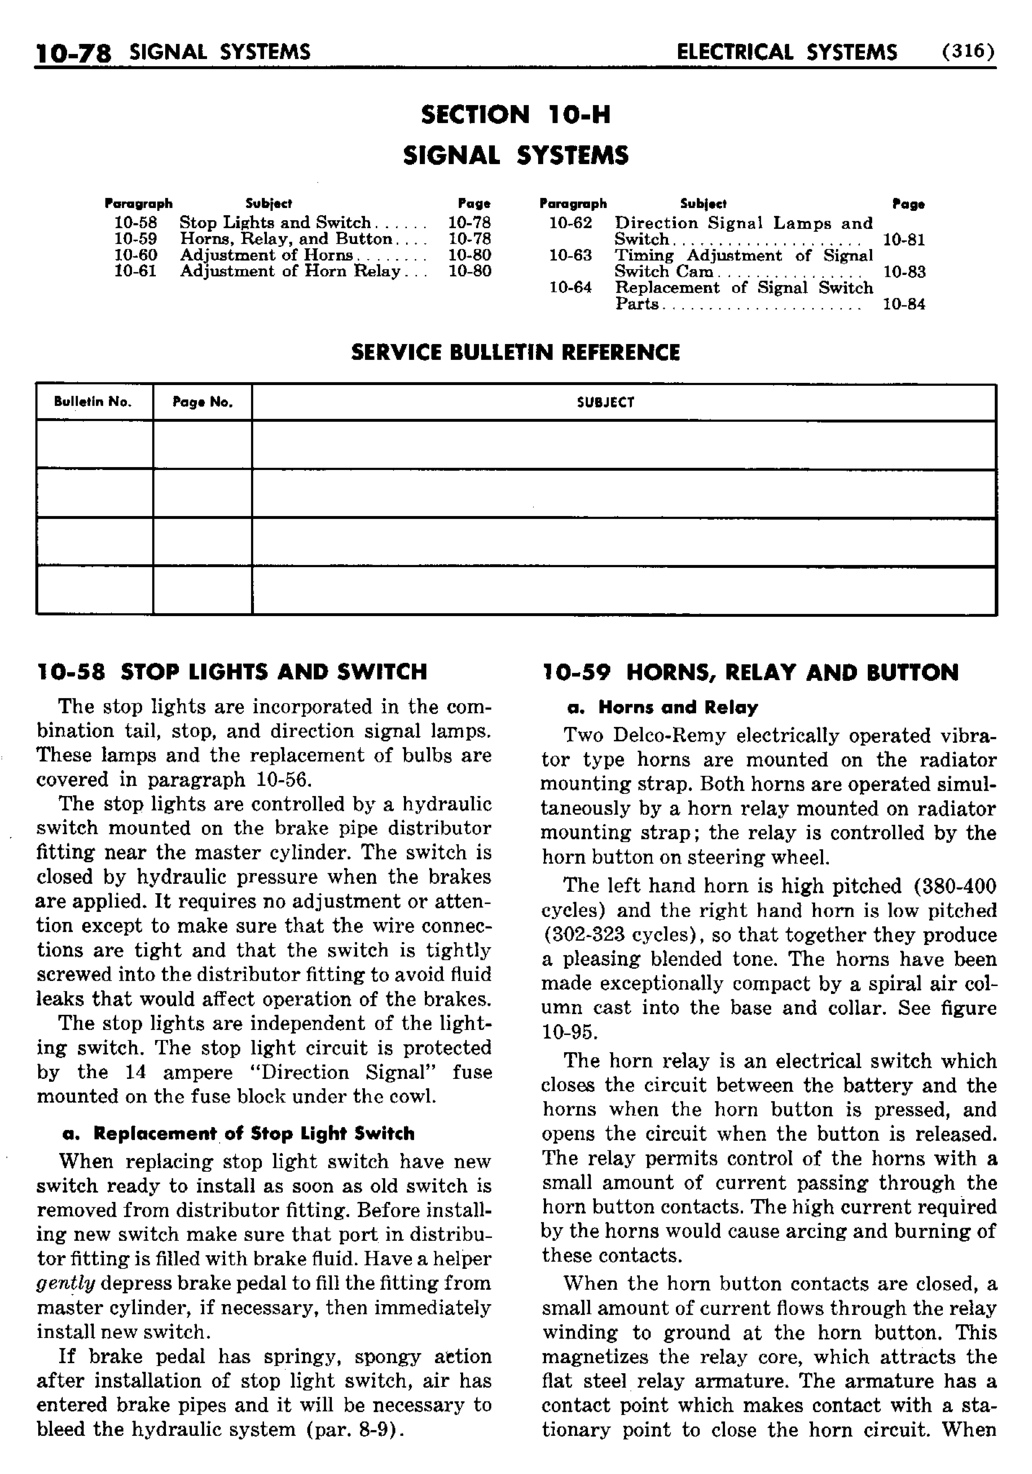 n_11 1950 Buick Shop Manual - Electrical Systems-078-078.jpg